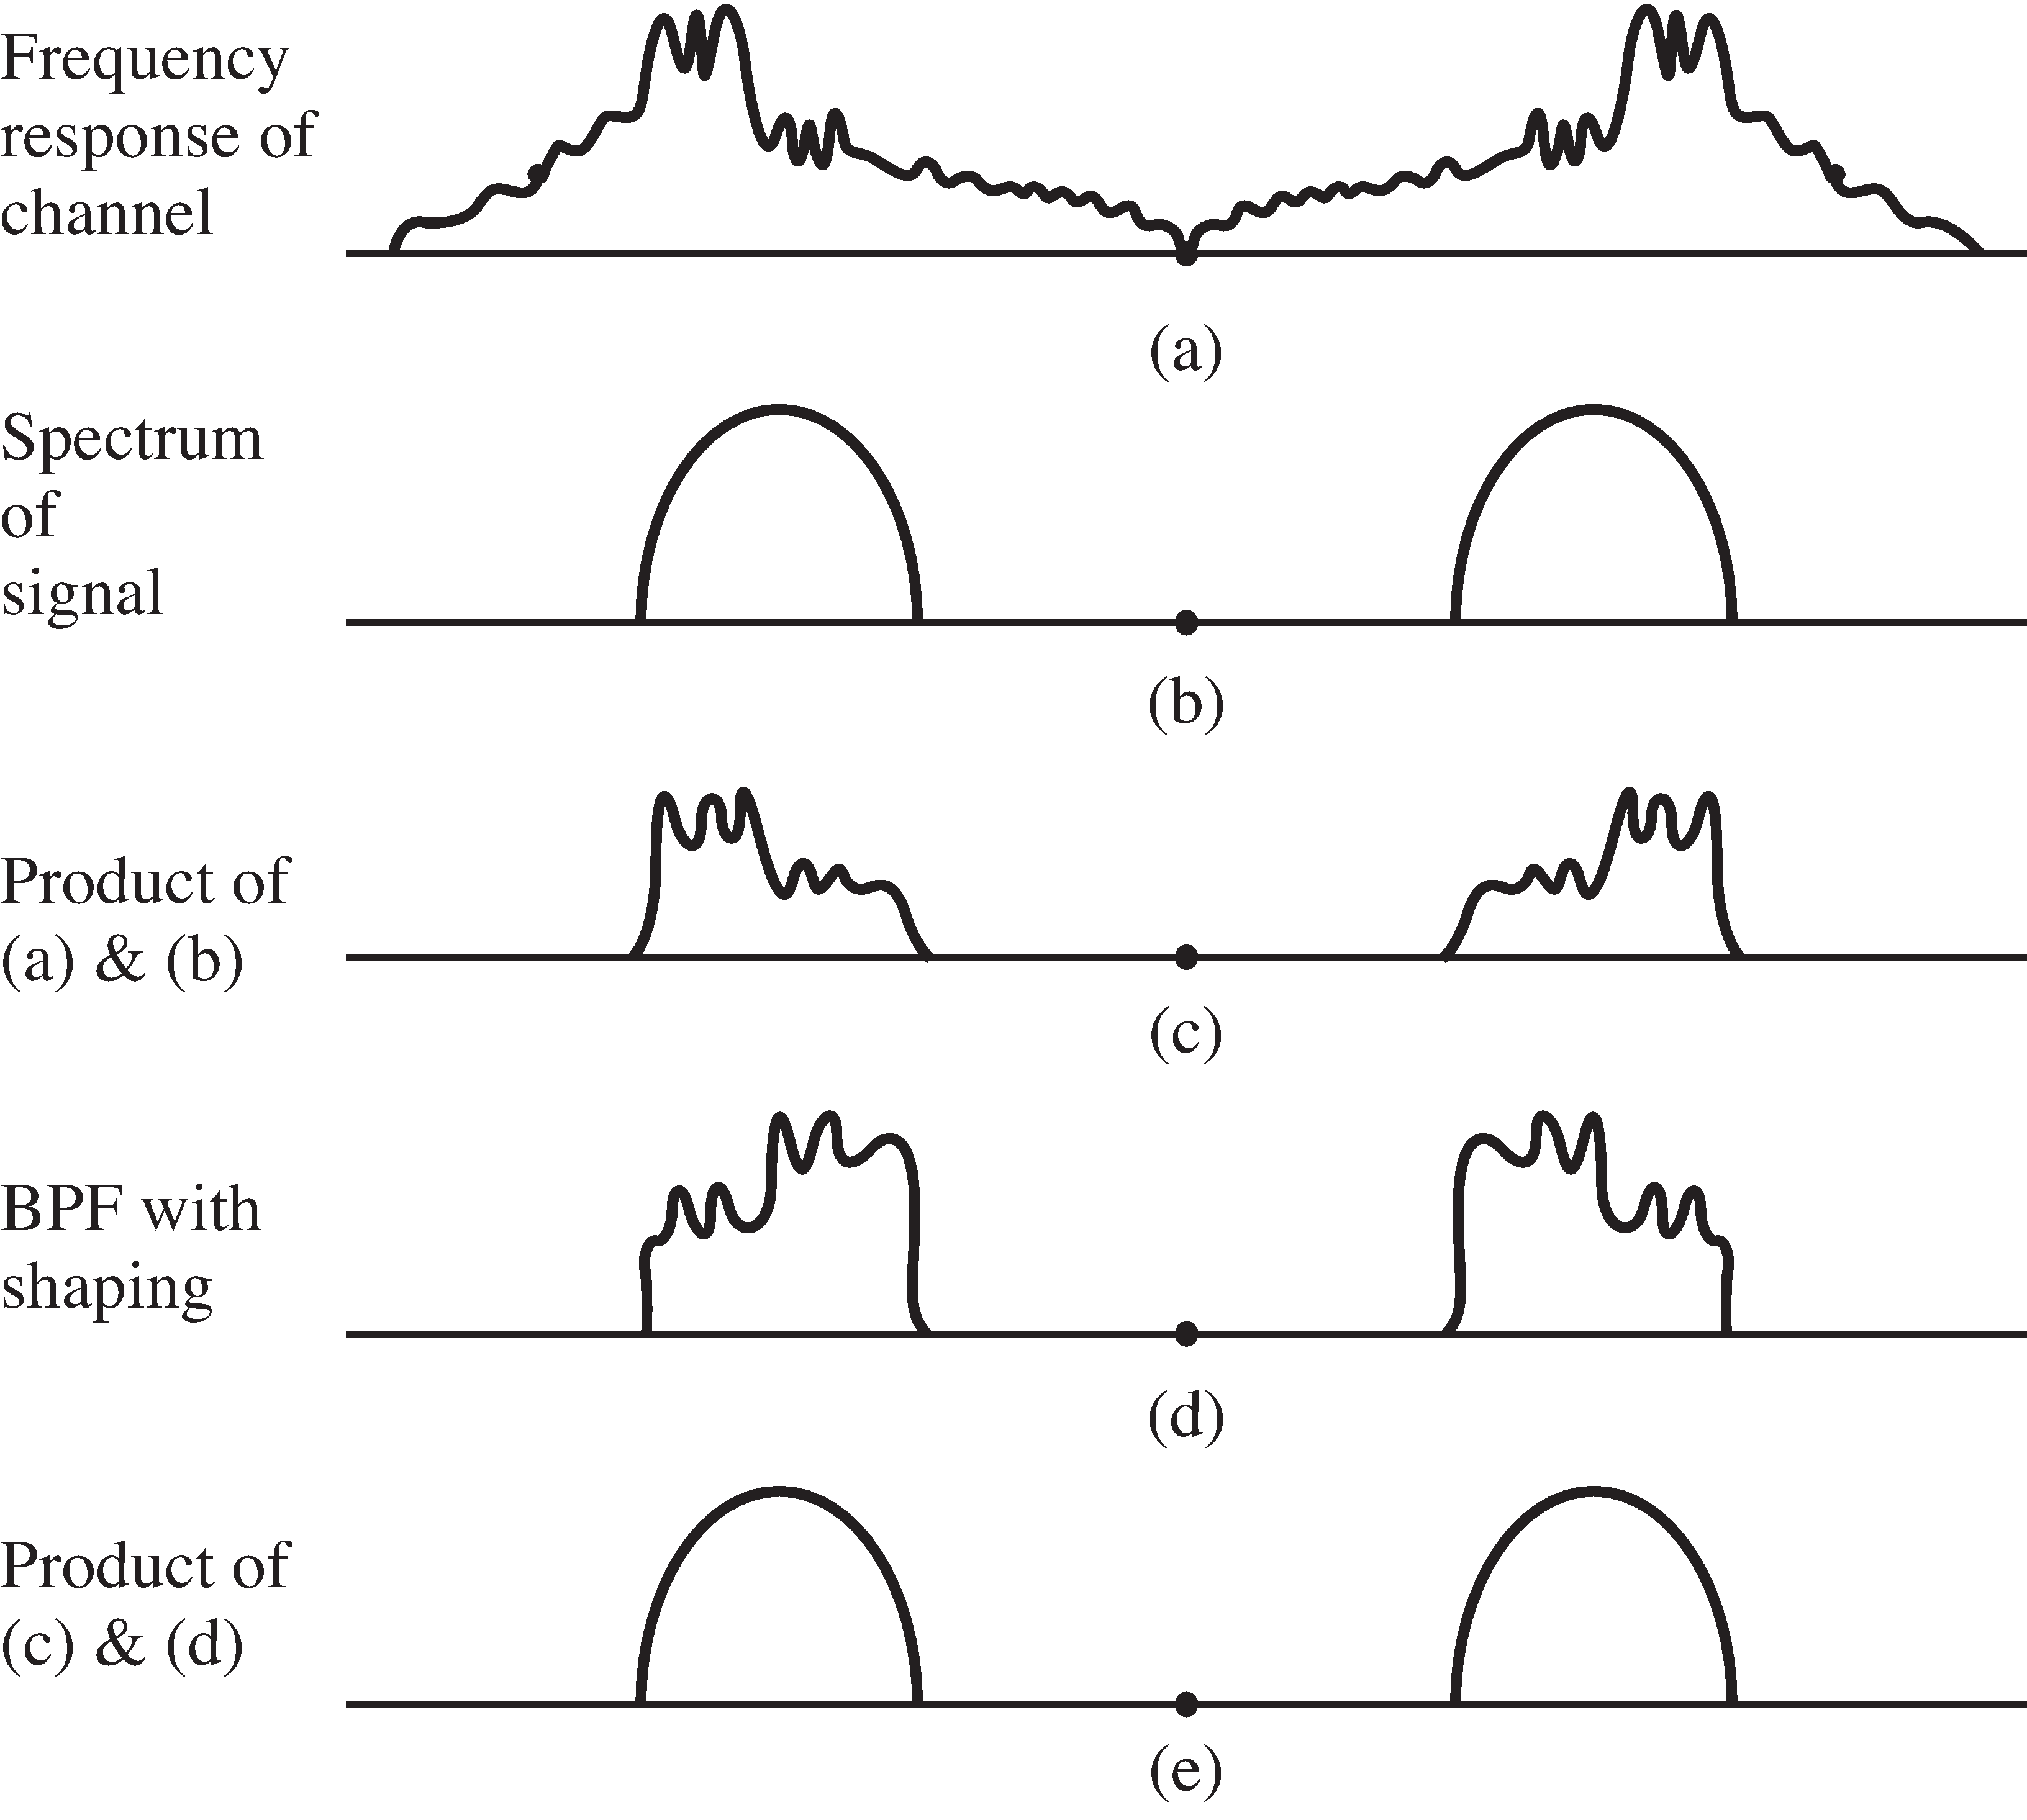 (a) The frequency response of the channel. (b) The spectrum of the signal. (c) The product of (a) and (b) which is the spectrum of the received signal. (d) A BPF filter that has been shaped to undo the effect of the channel. (e) The product of (c) and (d), which combine to give a clean representation of the original spectrum of the signal.